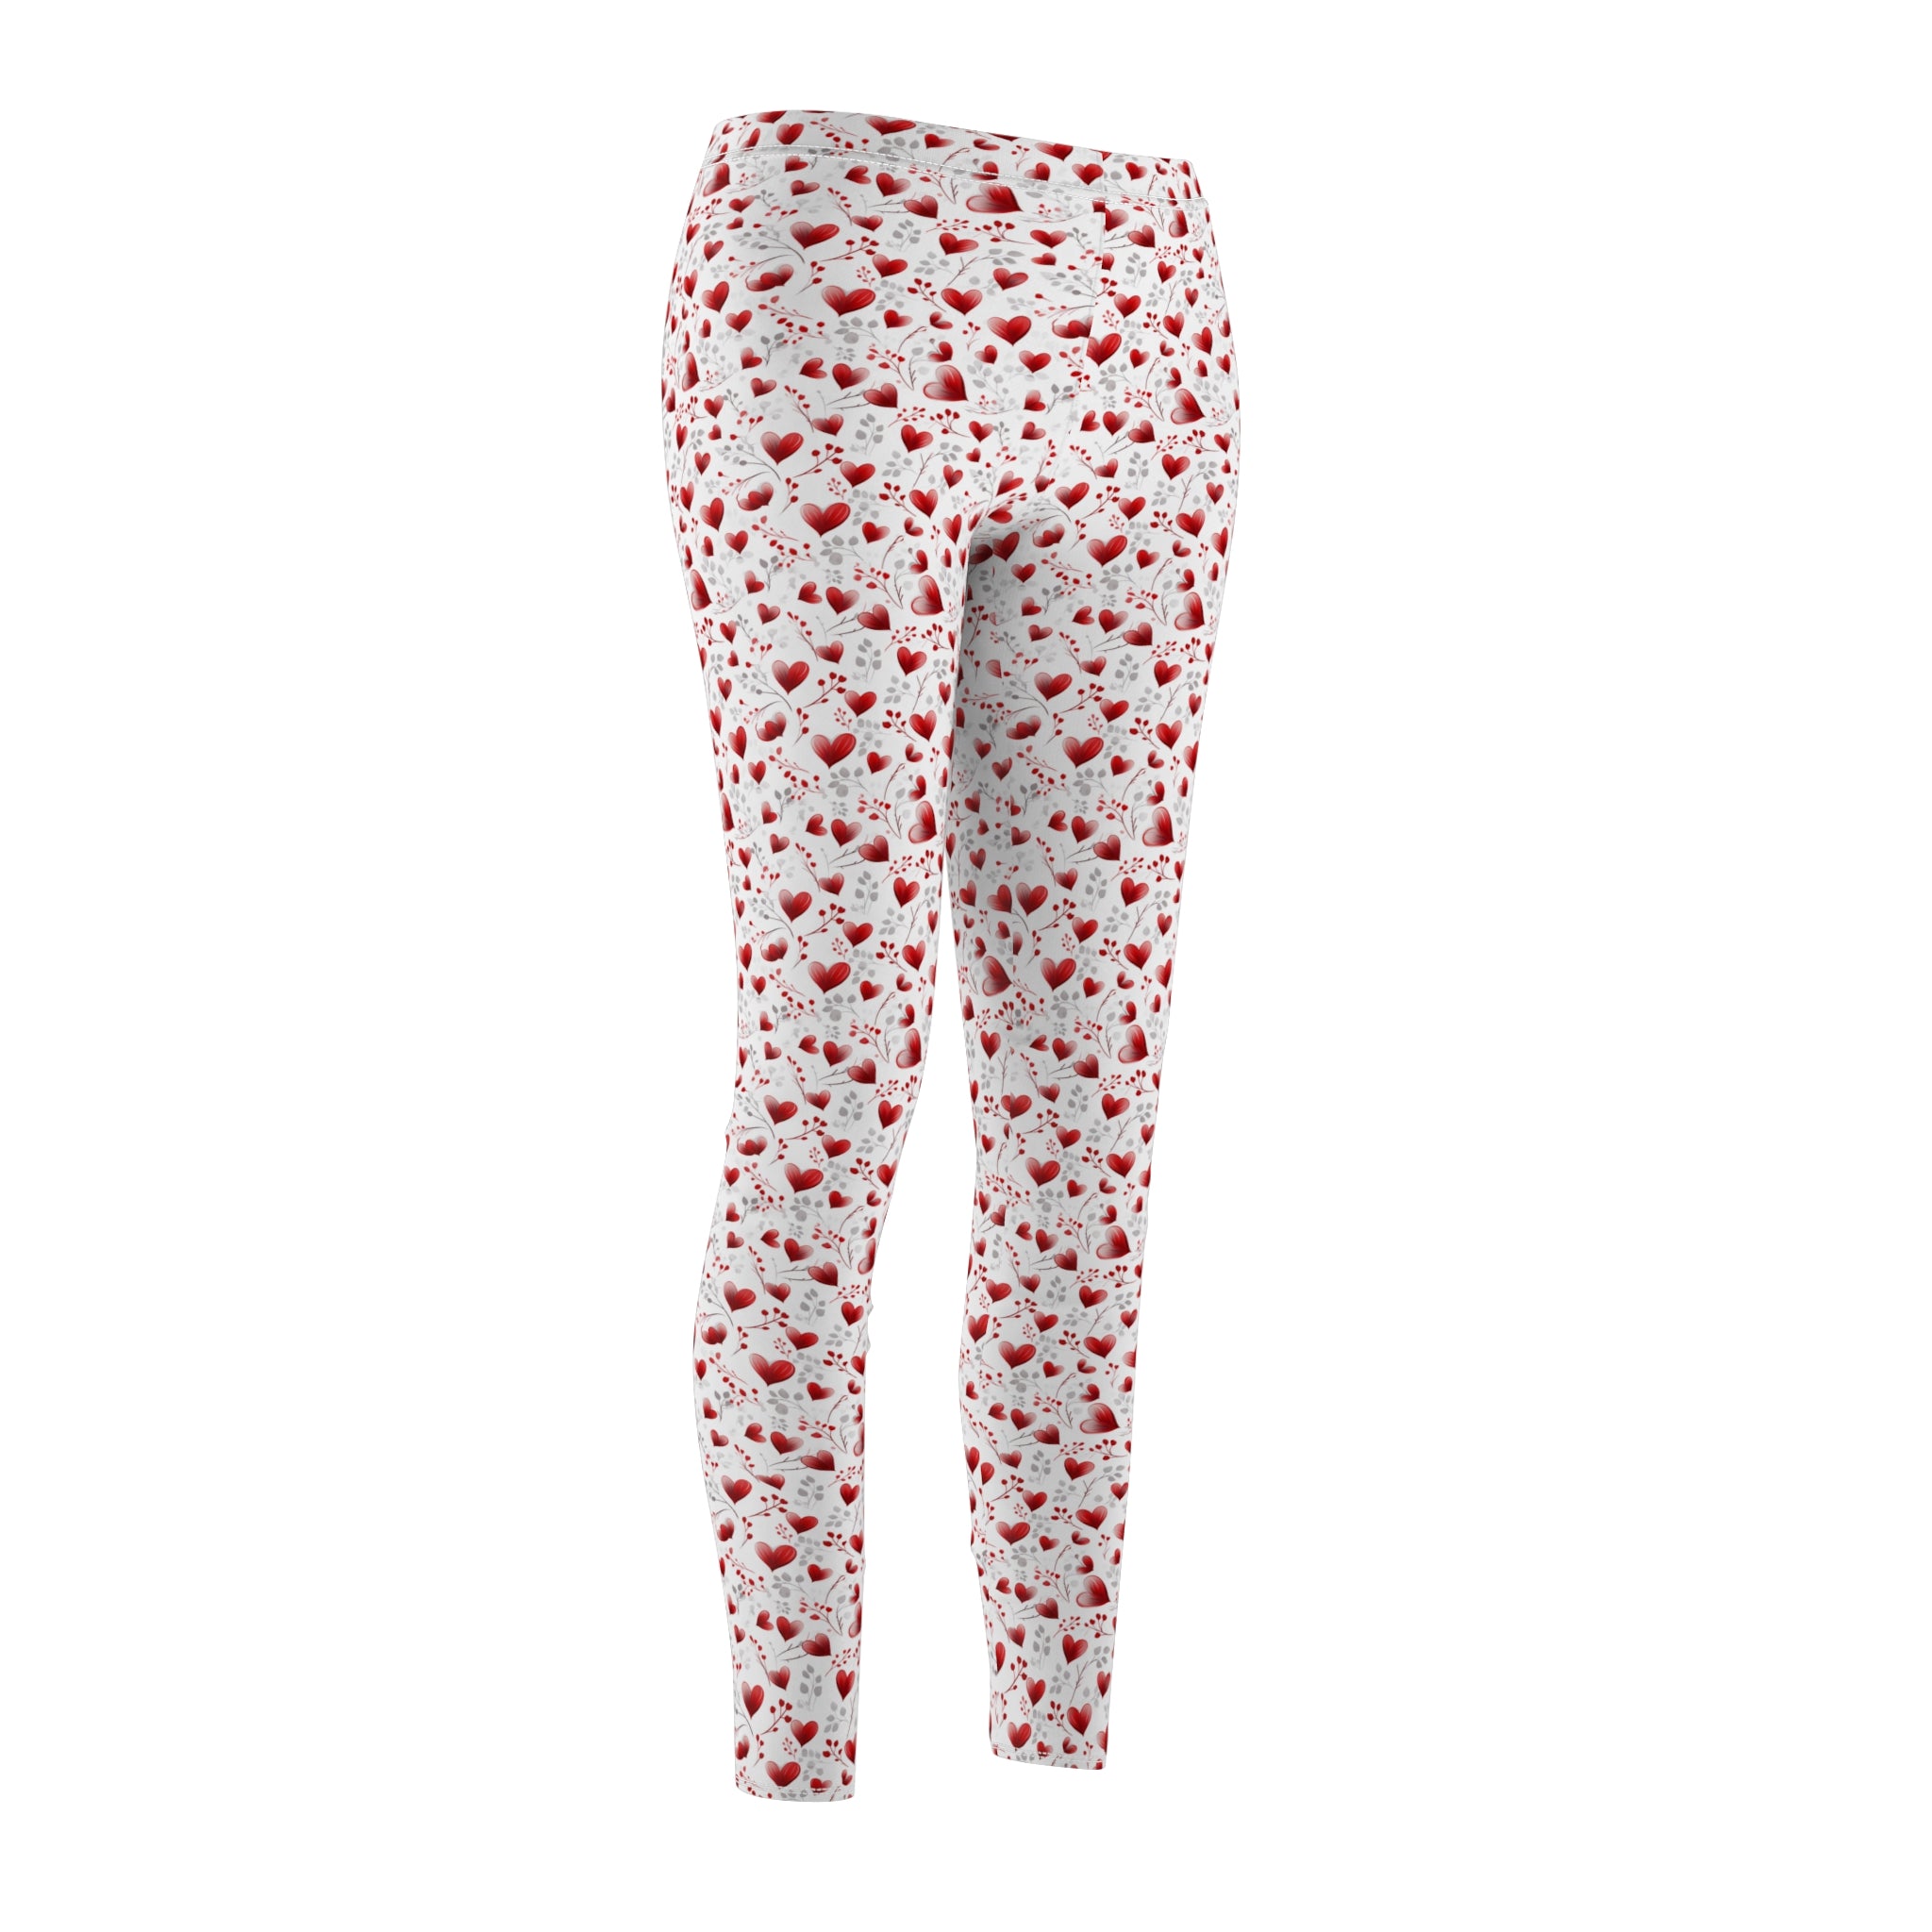 Valentine's Day Hearts Gym Leggings for Women - Love Your Workout